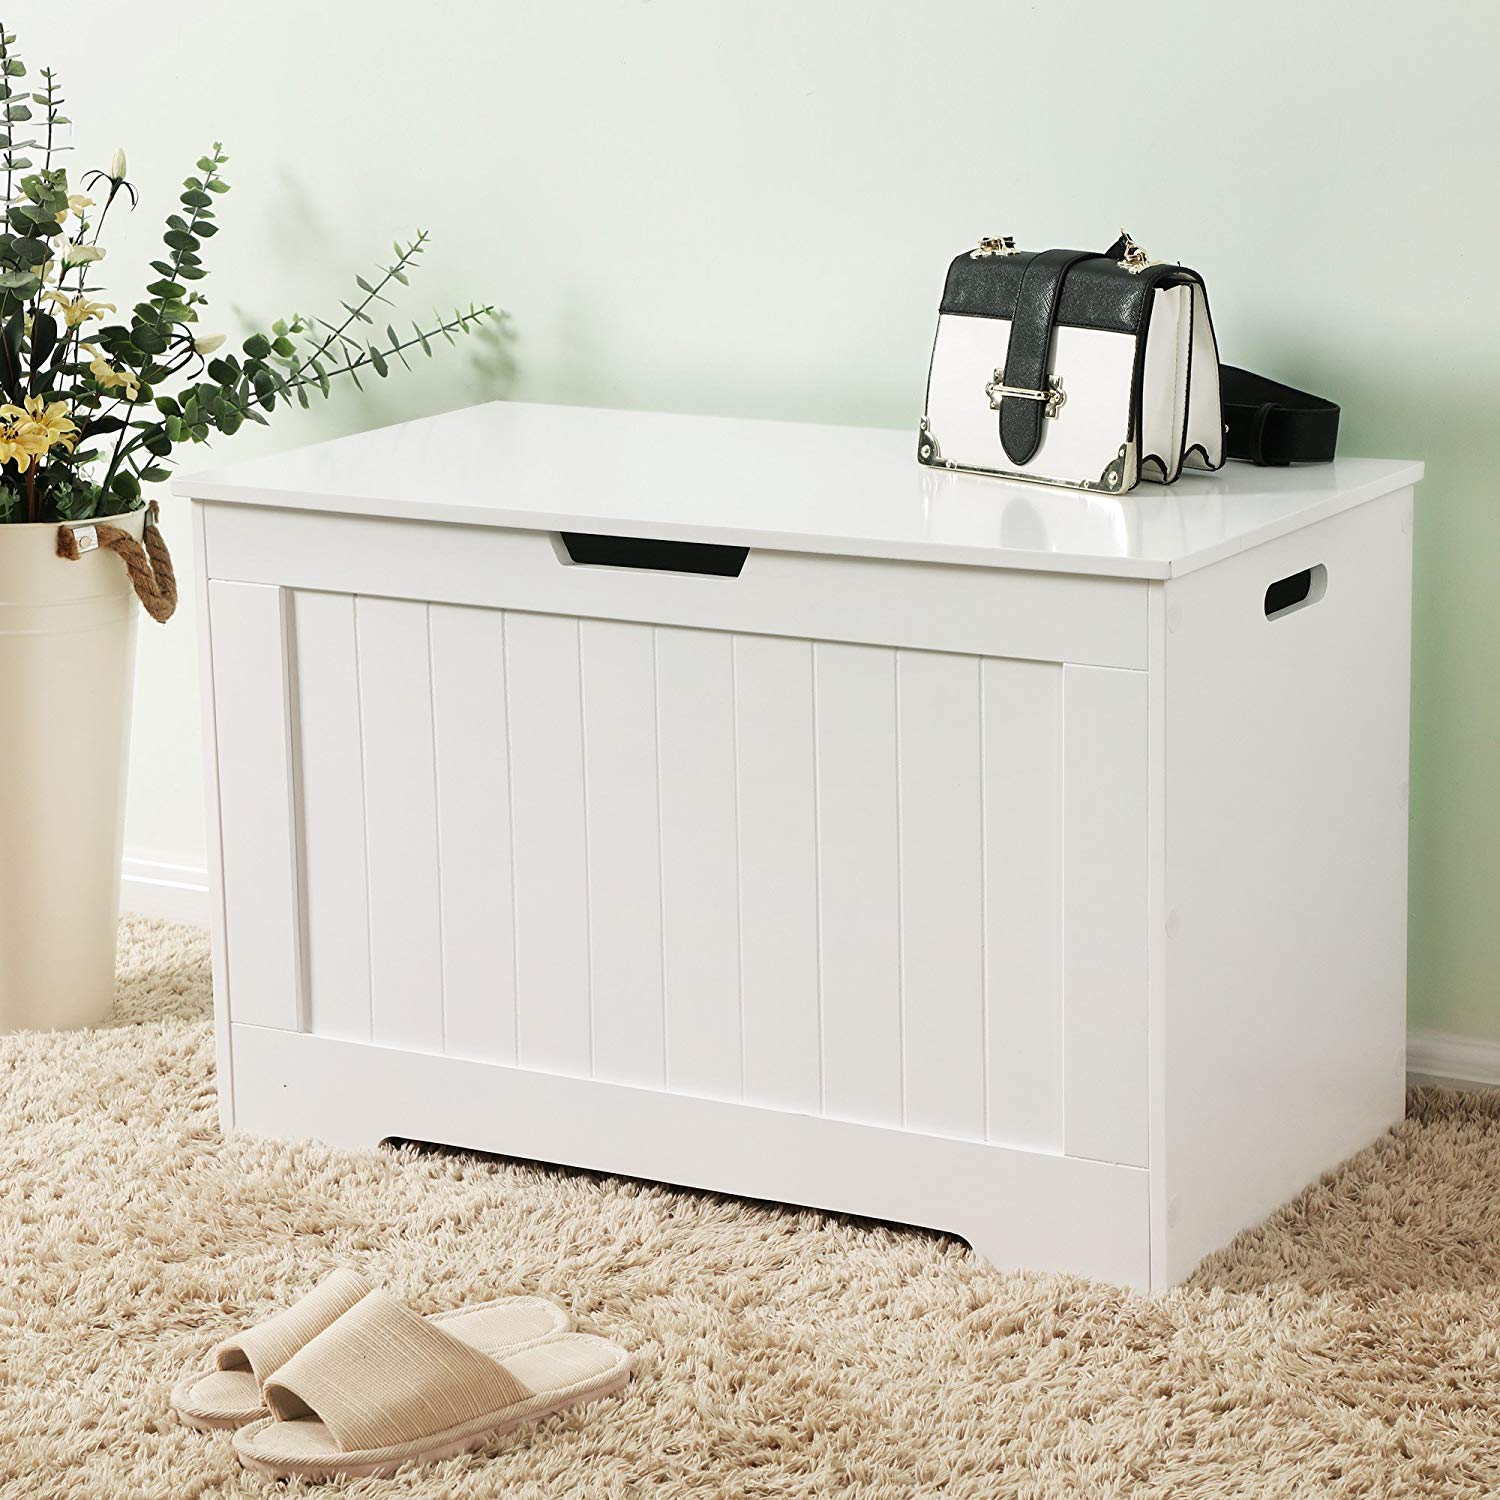 GZMR Wooden Toy Box White Rectangular Toy Box in the Toy Boxes ...